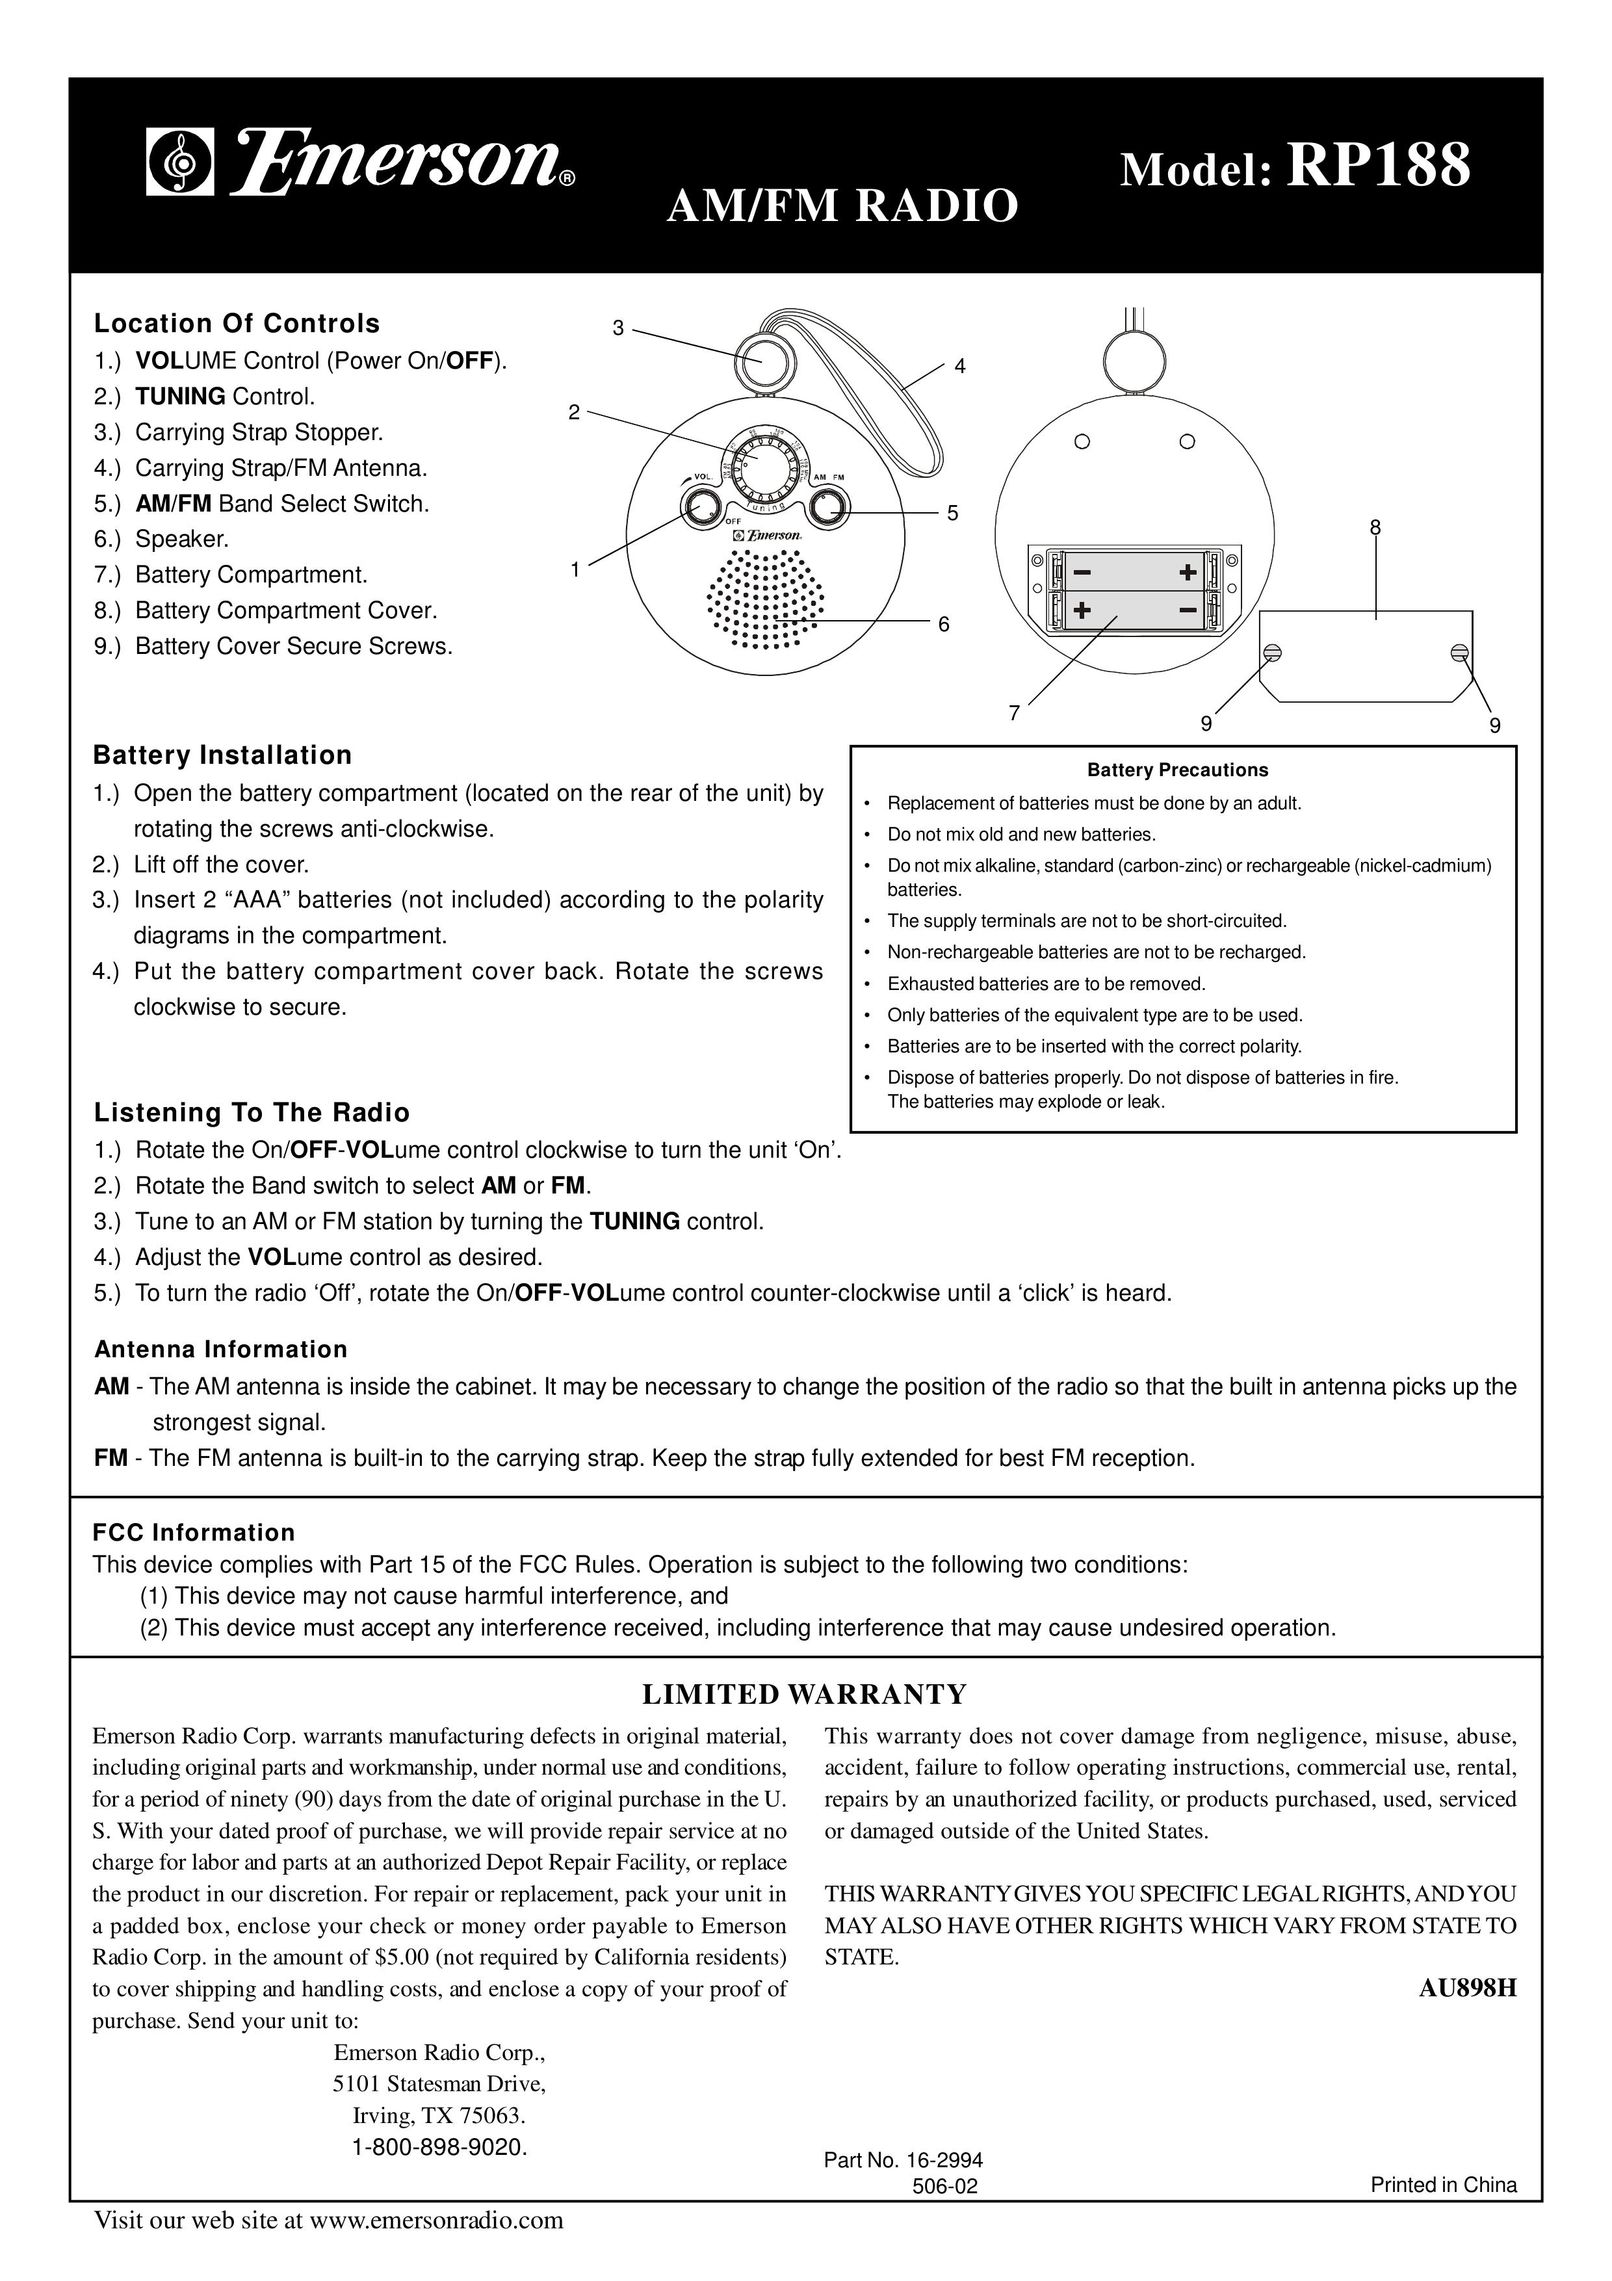 Emerson RP188 Stereo System User Manual